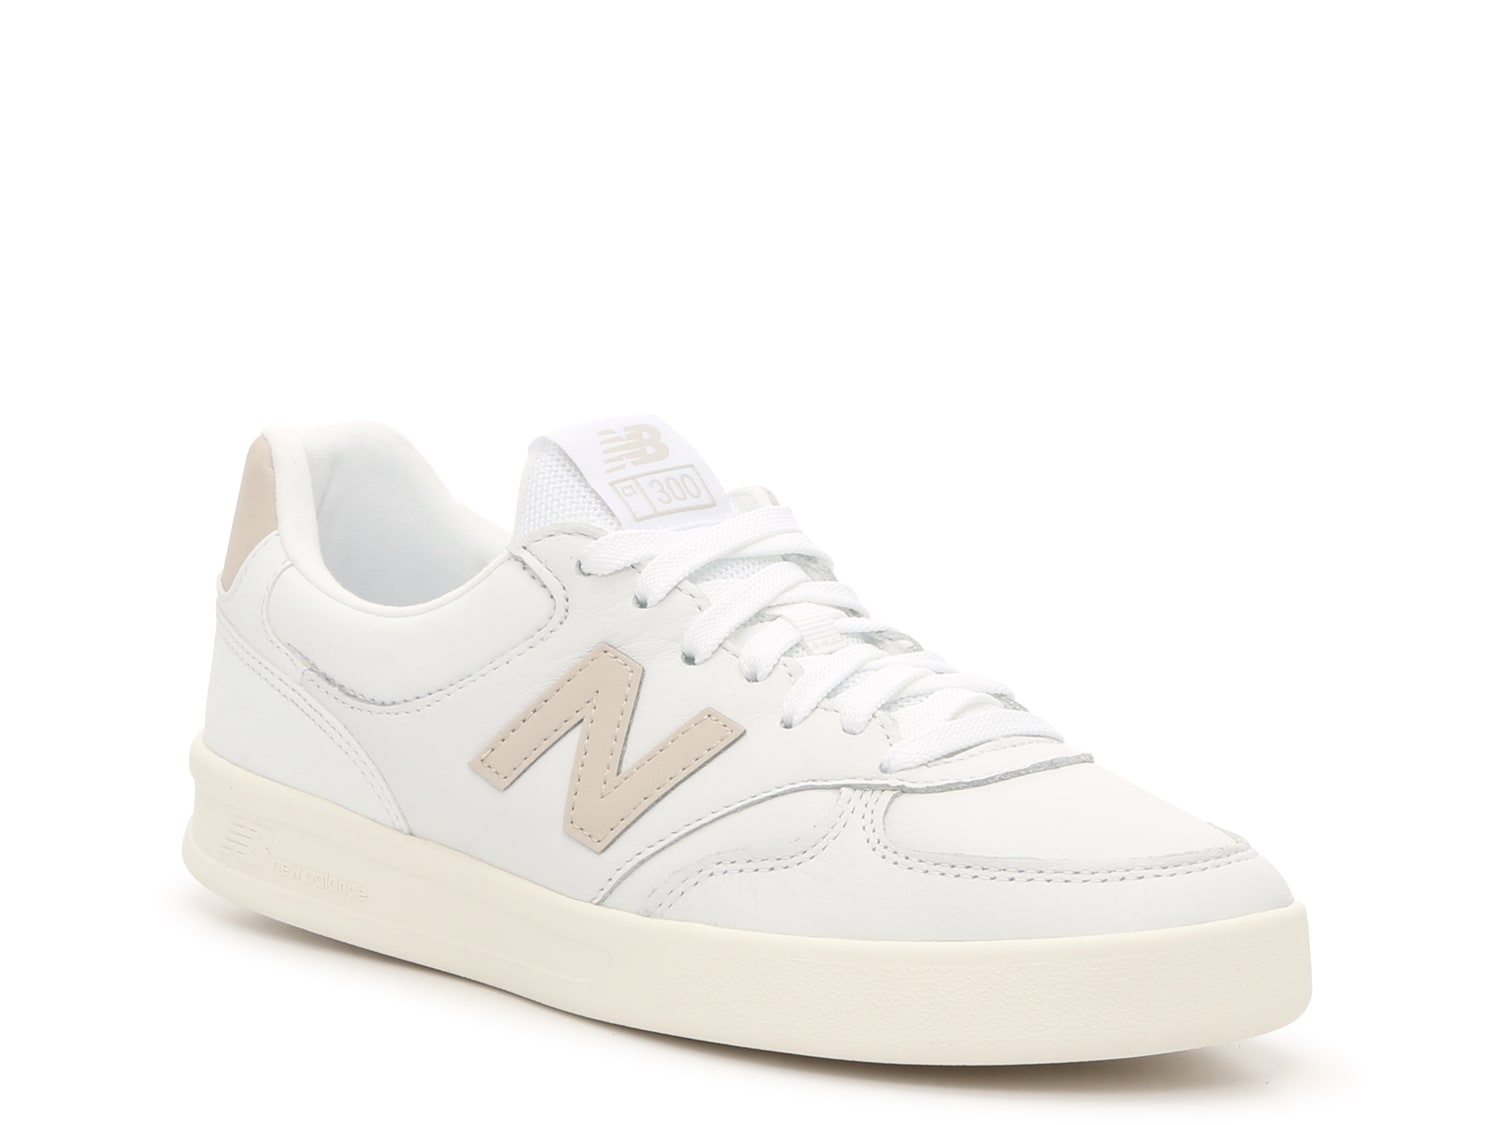 New Balance CT300 v3 Court Sneaker - Free Shipping | DSW